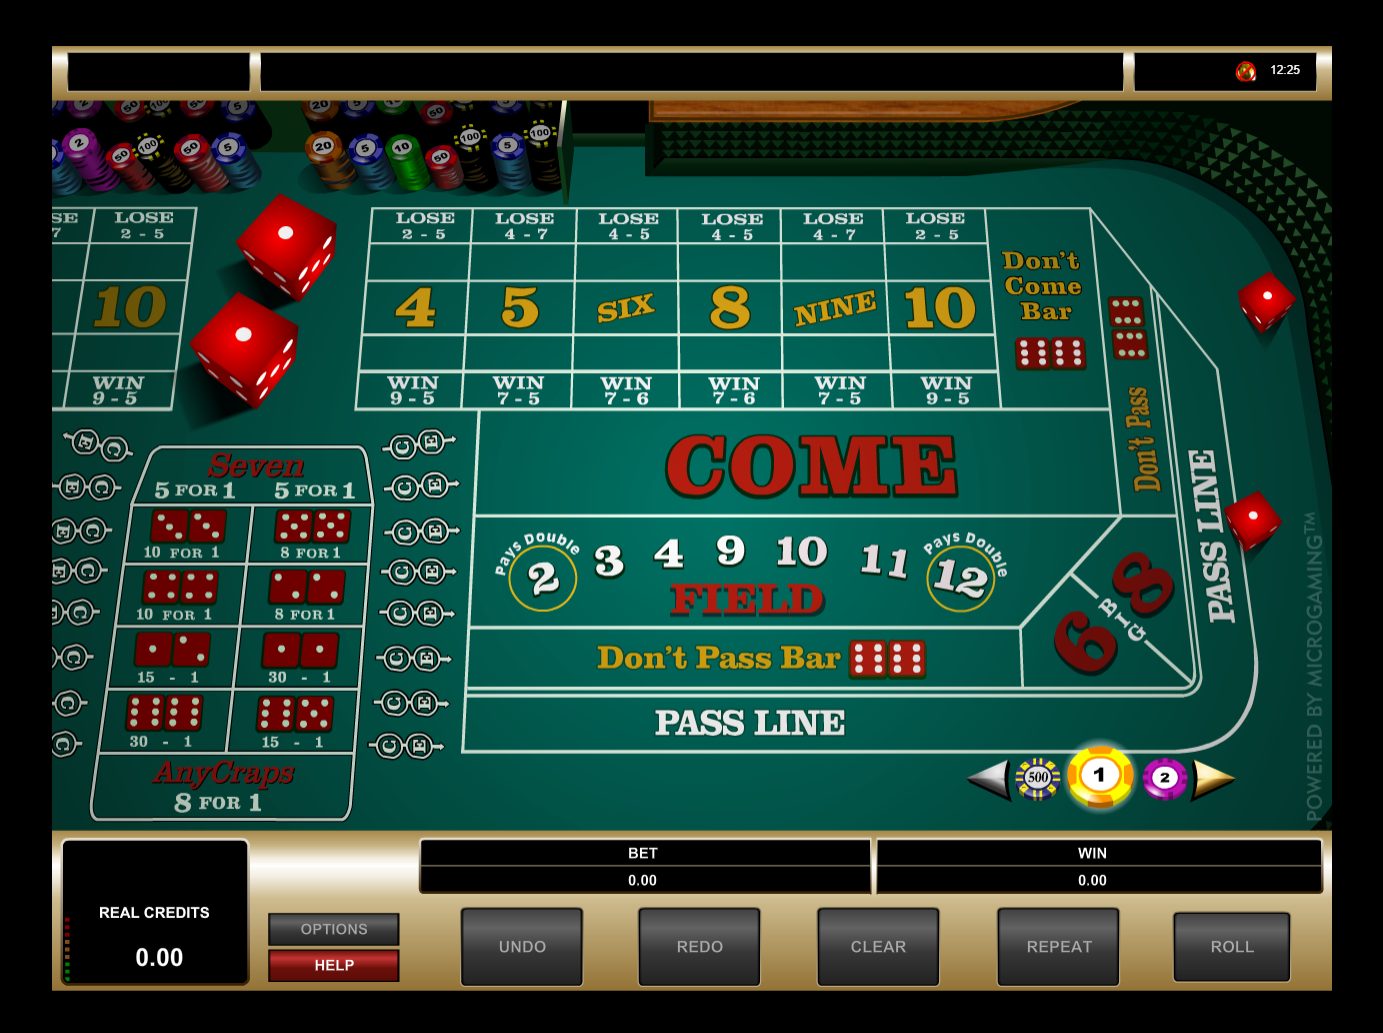 How To Play Craps At Casino